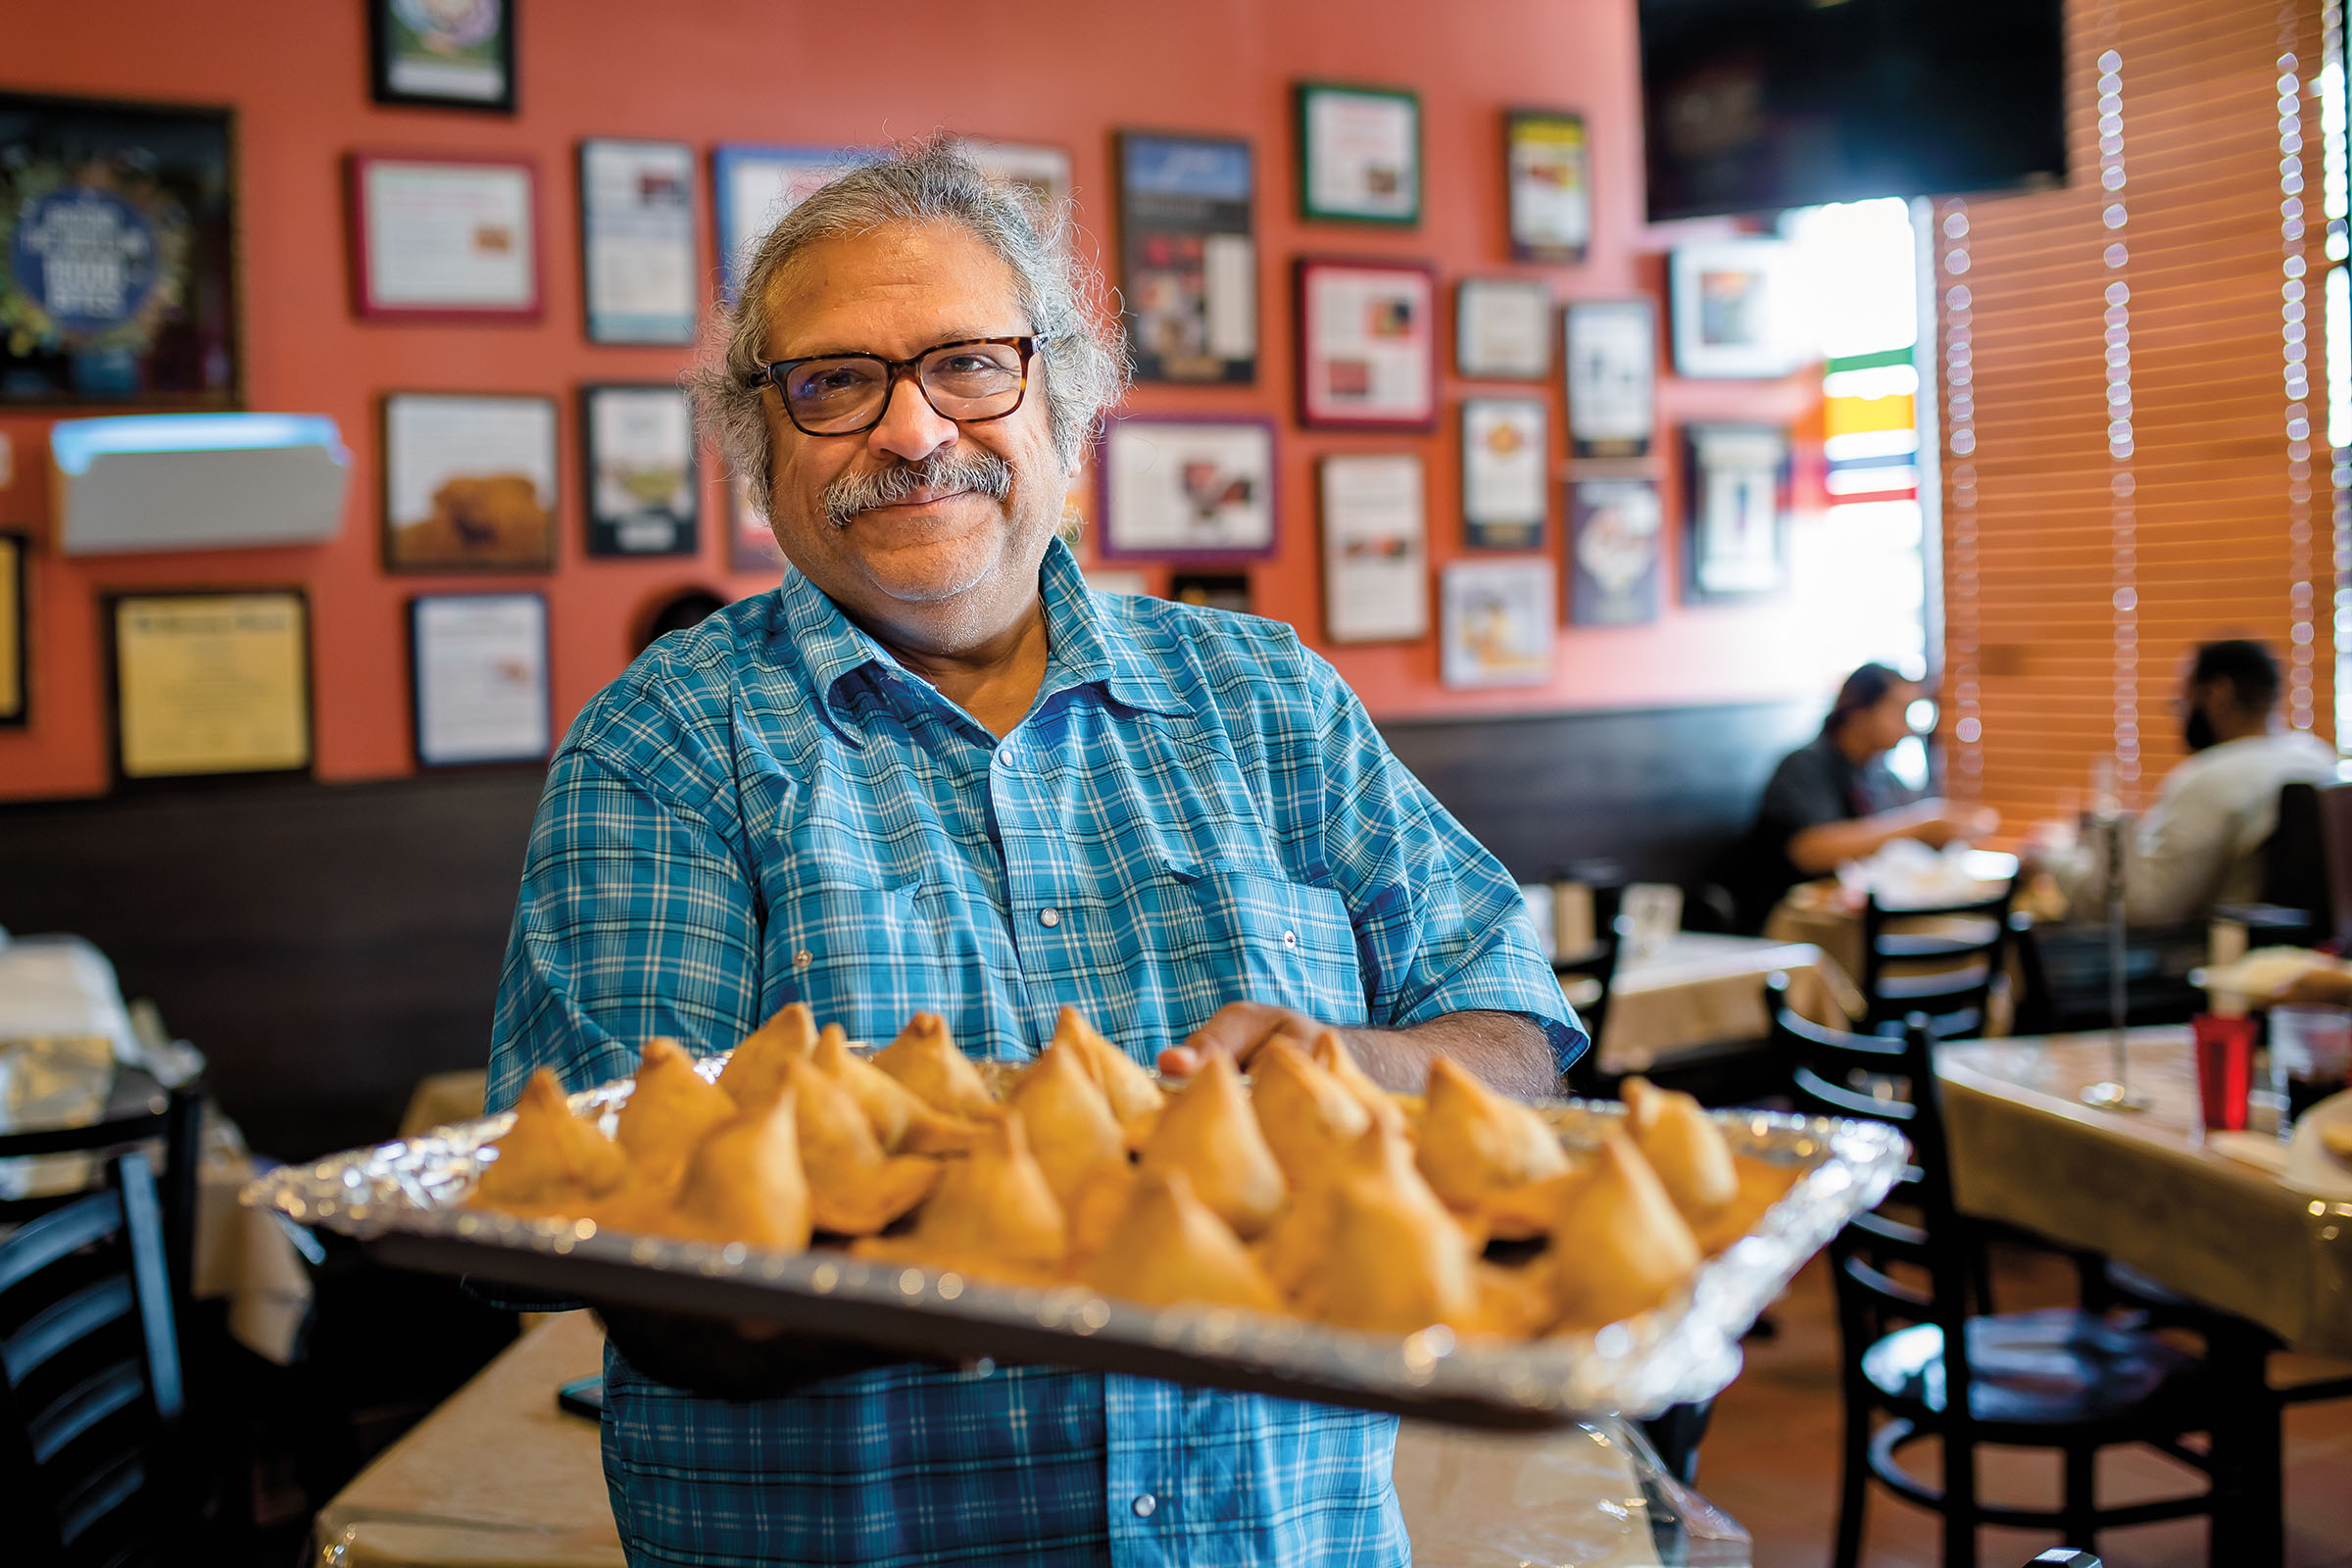 A man in a blue shirt and glasses holds out a tray of golden pastries